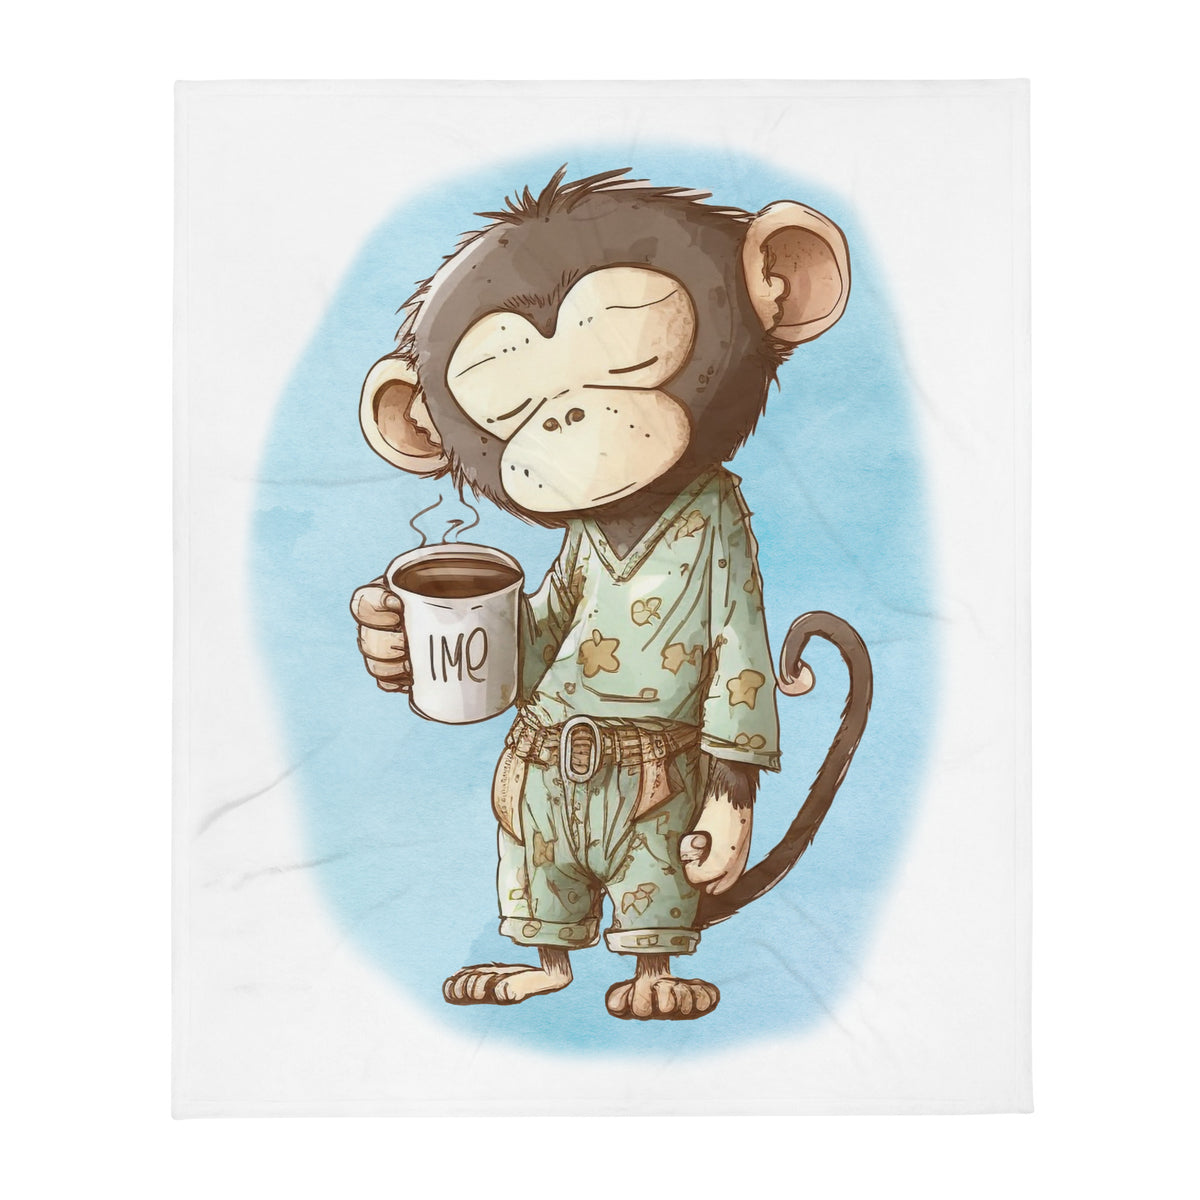 Sleepy Monkey 100% Polyester Soft Silk Touch Fabric Throw Blanket - Cozy, Durable and Adorable